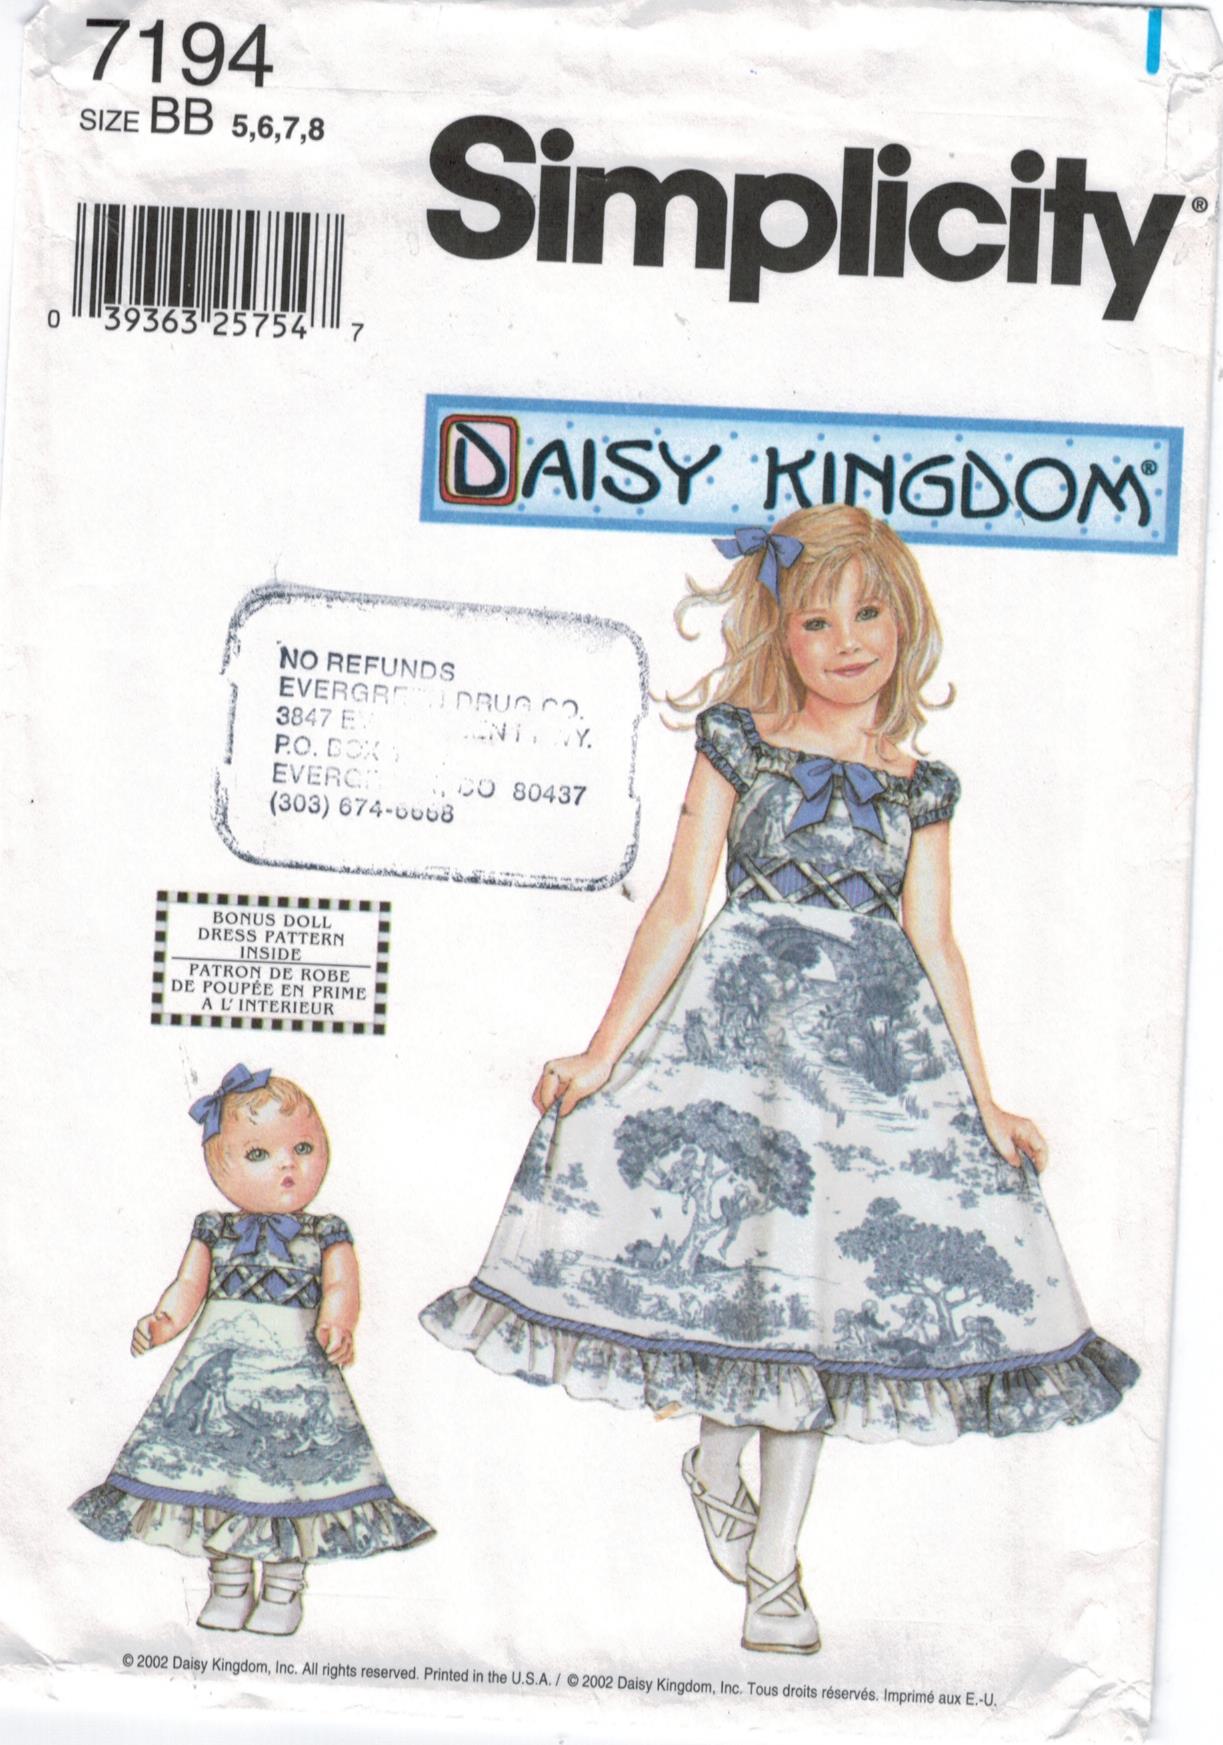 UNCUT 1998 Simplicity  Daisy Kingdom Pattern 8263 Girls Dress and pinafore size 3 4 5 6  matching outfit pattern for 18 doll.FACTORY FOLDED